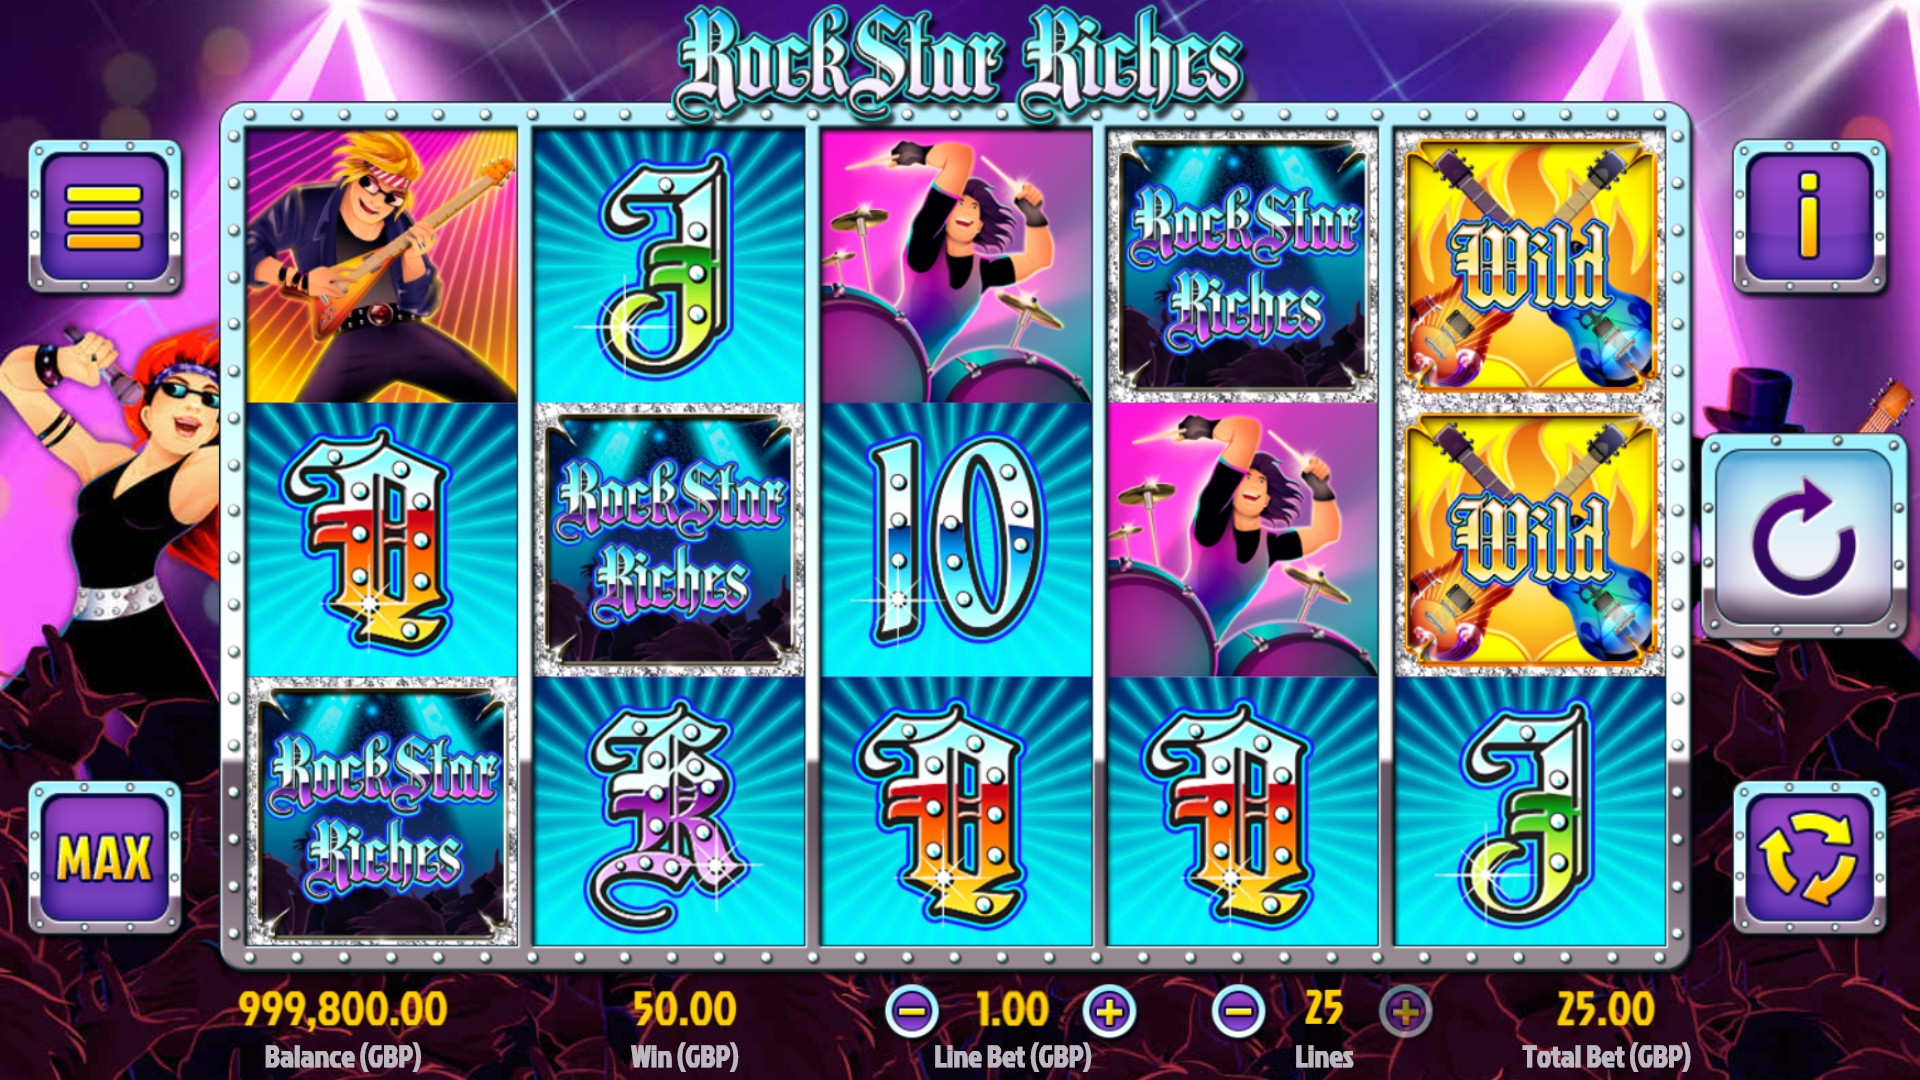 Rock Star Riches (Rock Star Riches) from category Slots